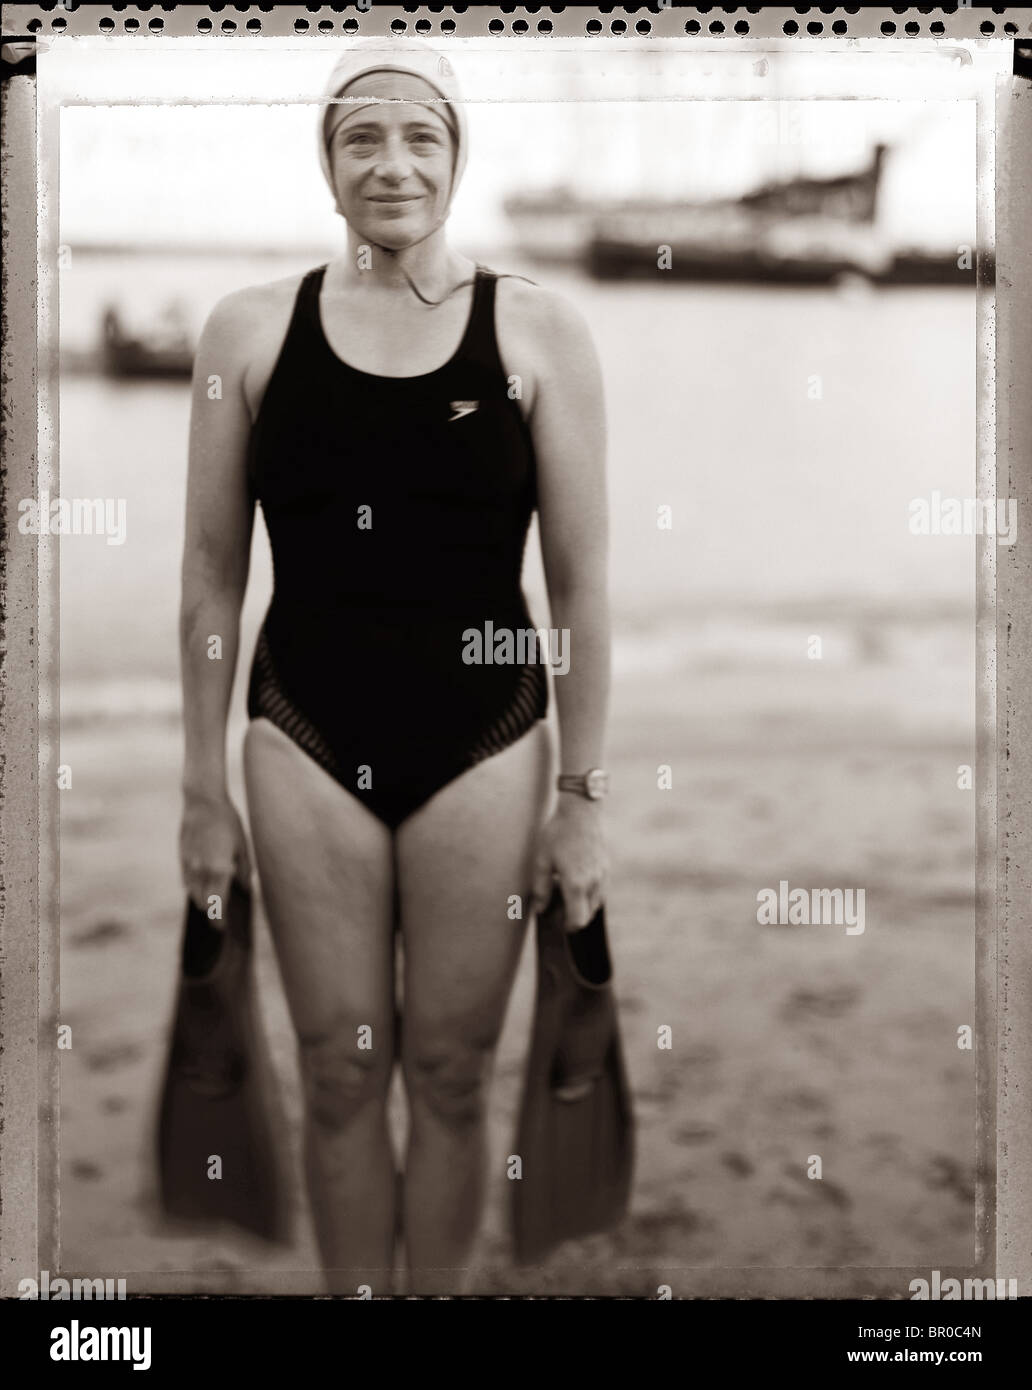 Middle Aged Caucasian woman swimmer on a beach wearing a dark swimming suit holding flippers in each hand. Stock Photo